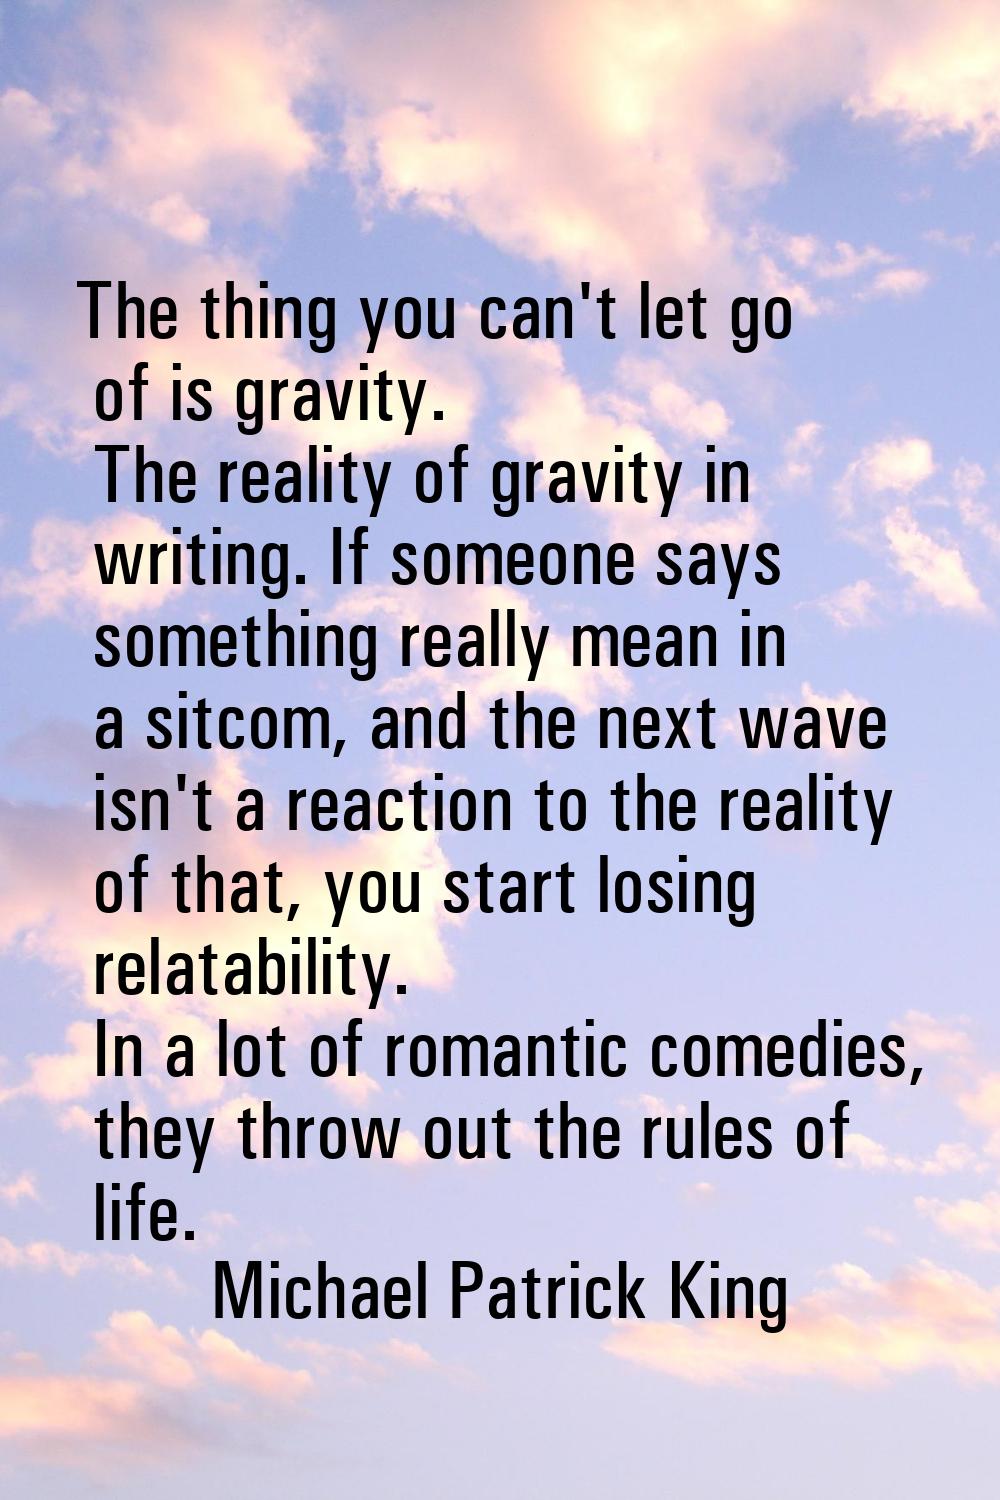 The thing you can't let go of is gravity. The reality of gravity in writing. If someone says someth